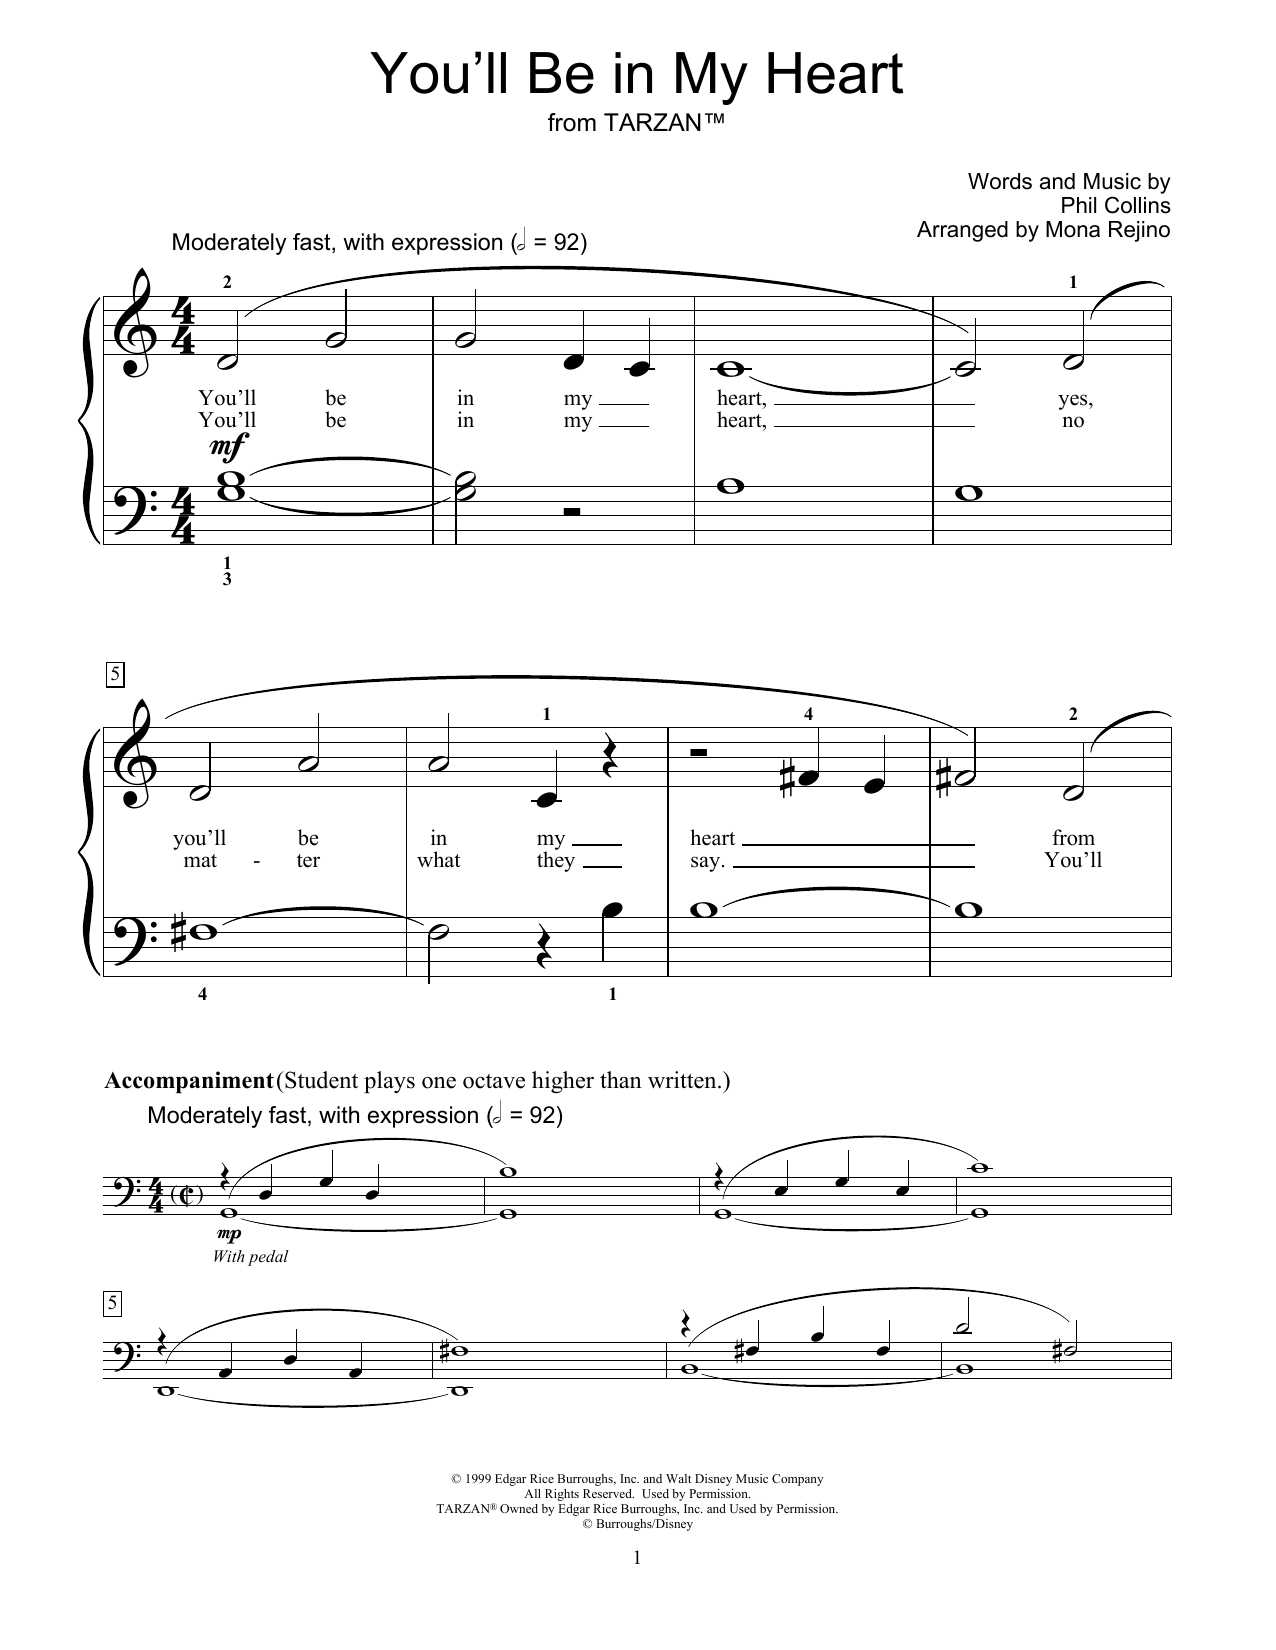 Download Phil Collins You'll Be In My Heart (from Tarzan) (ar Sheet Music